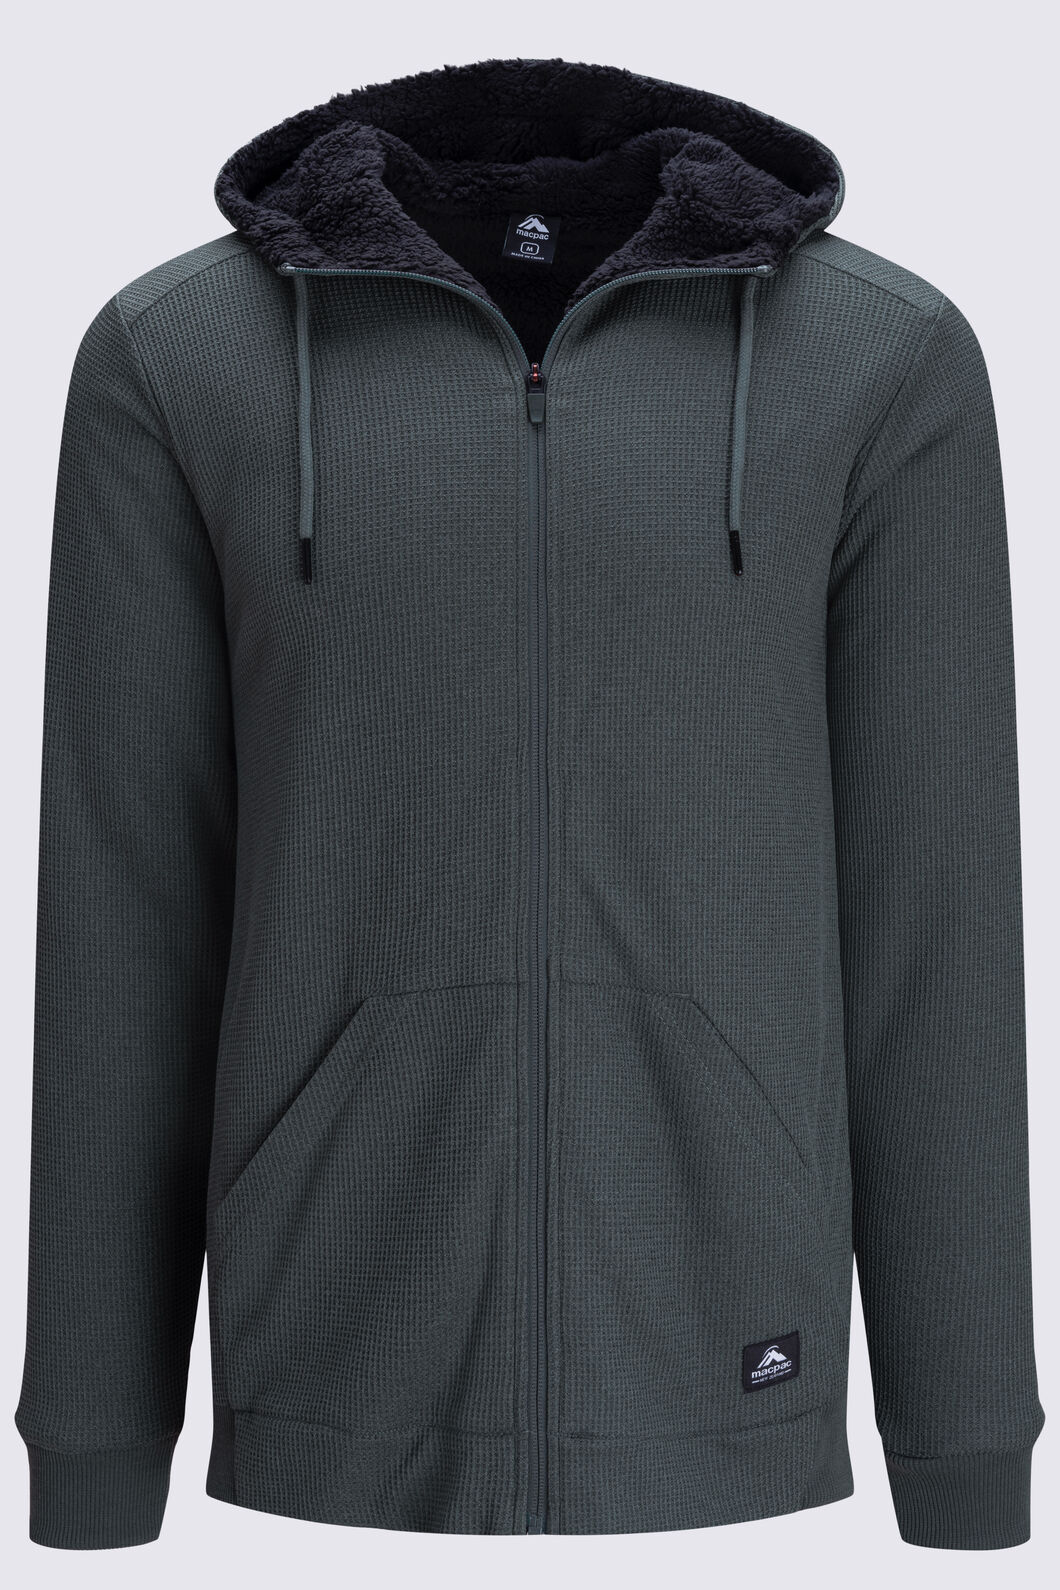 The Hoodie Store - Soft Feel Comfort Cut Hoodie with Waffle Inner